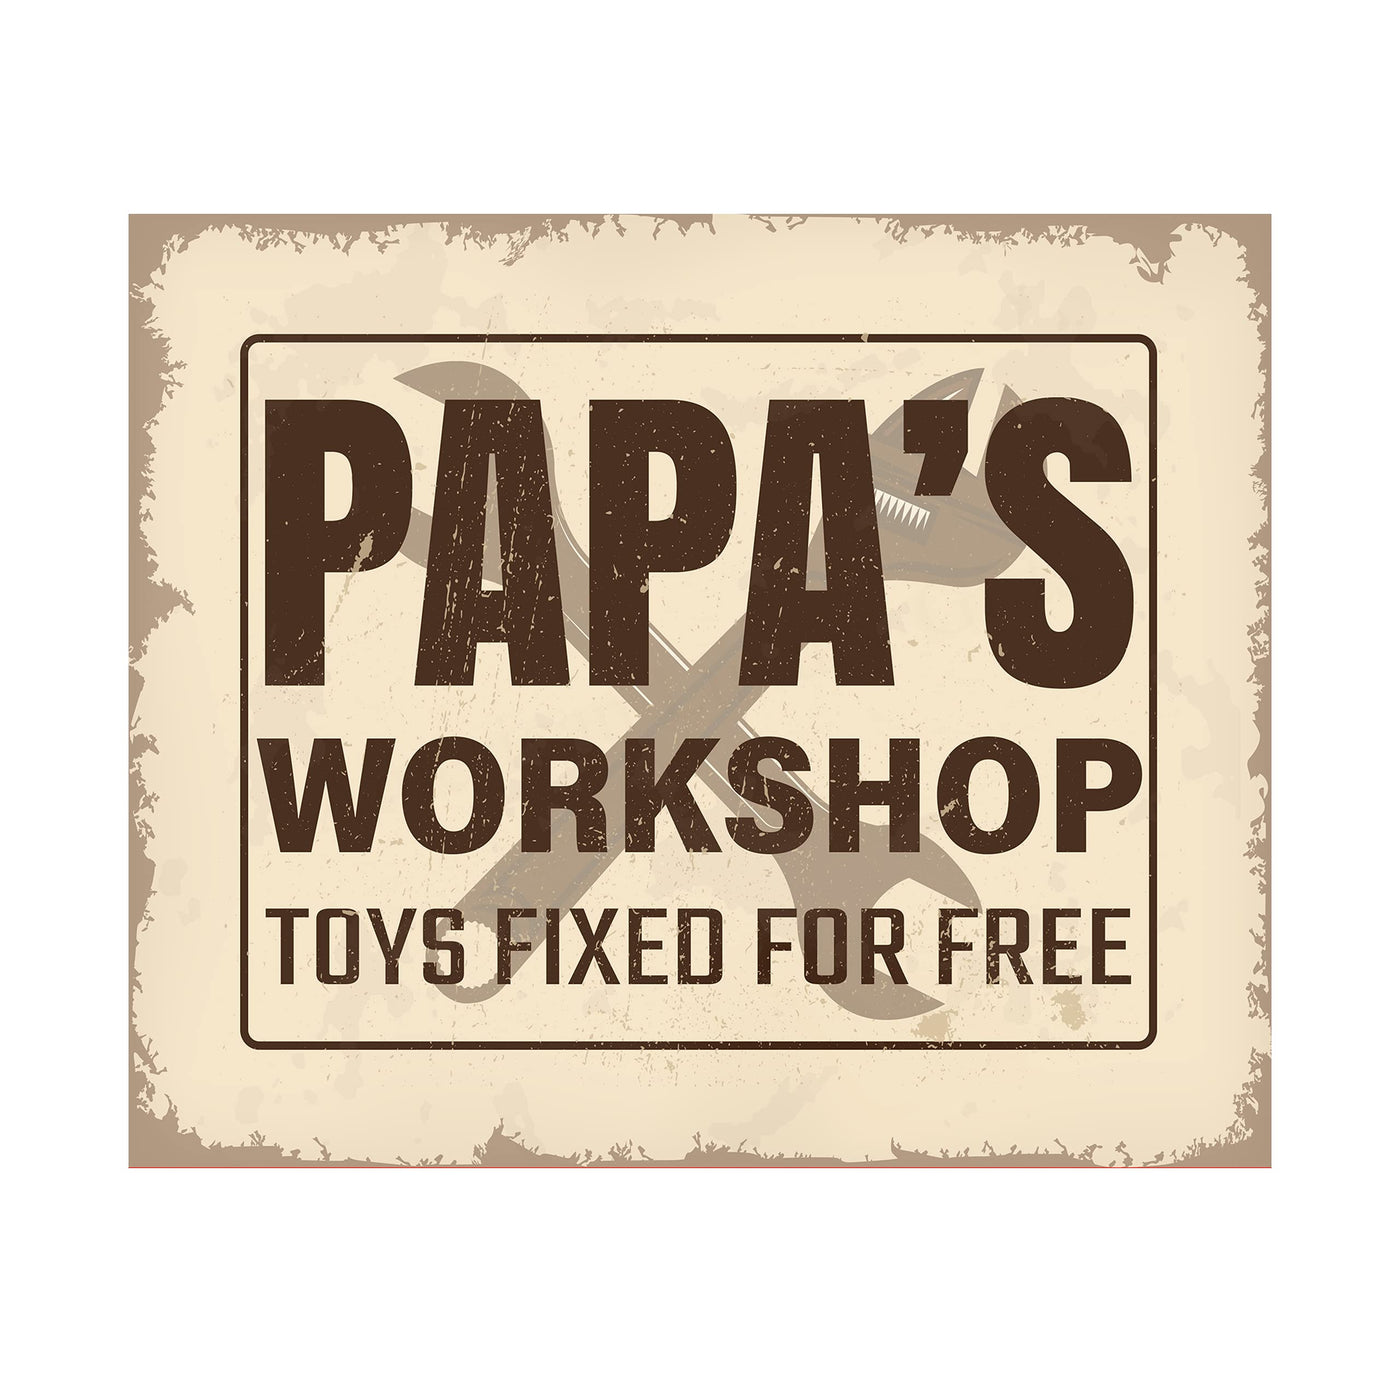 Papa's Tool Shop-Toys Fixed for Free Funny Garage Sign -10 x 8" Rustic Tool Wall Art Print-Ready to Frame. Humorous Decor for Home-Garage-Shop. Fun Man Cave Accessories. Great Gift for Dad-Grandpa!